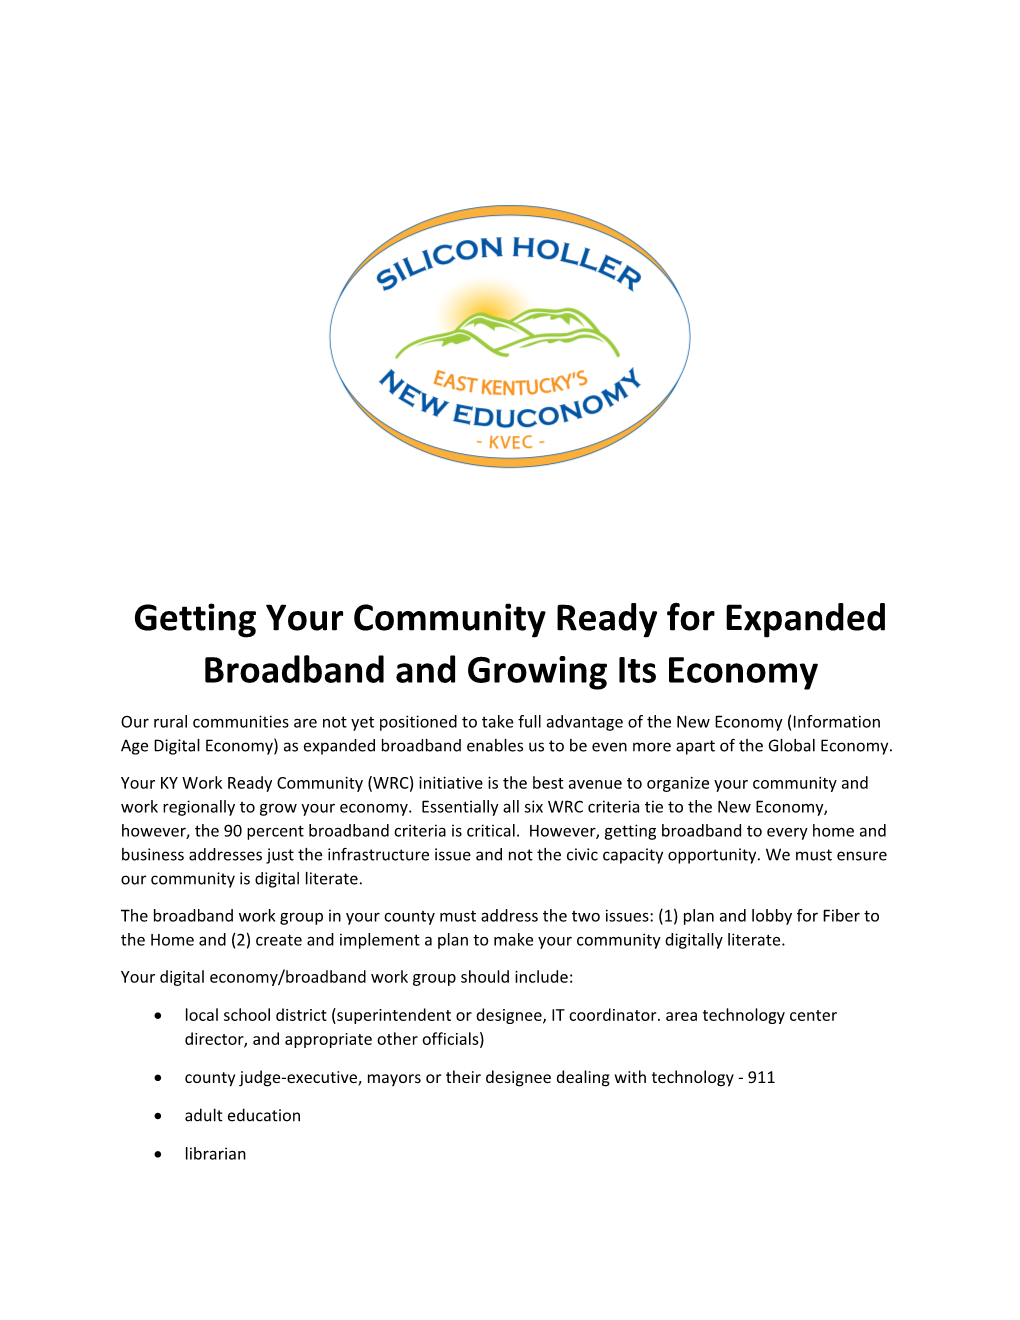 Getting Your Community Ready for Expanded Broadband and Growing Its Economy